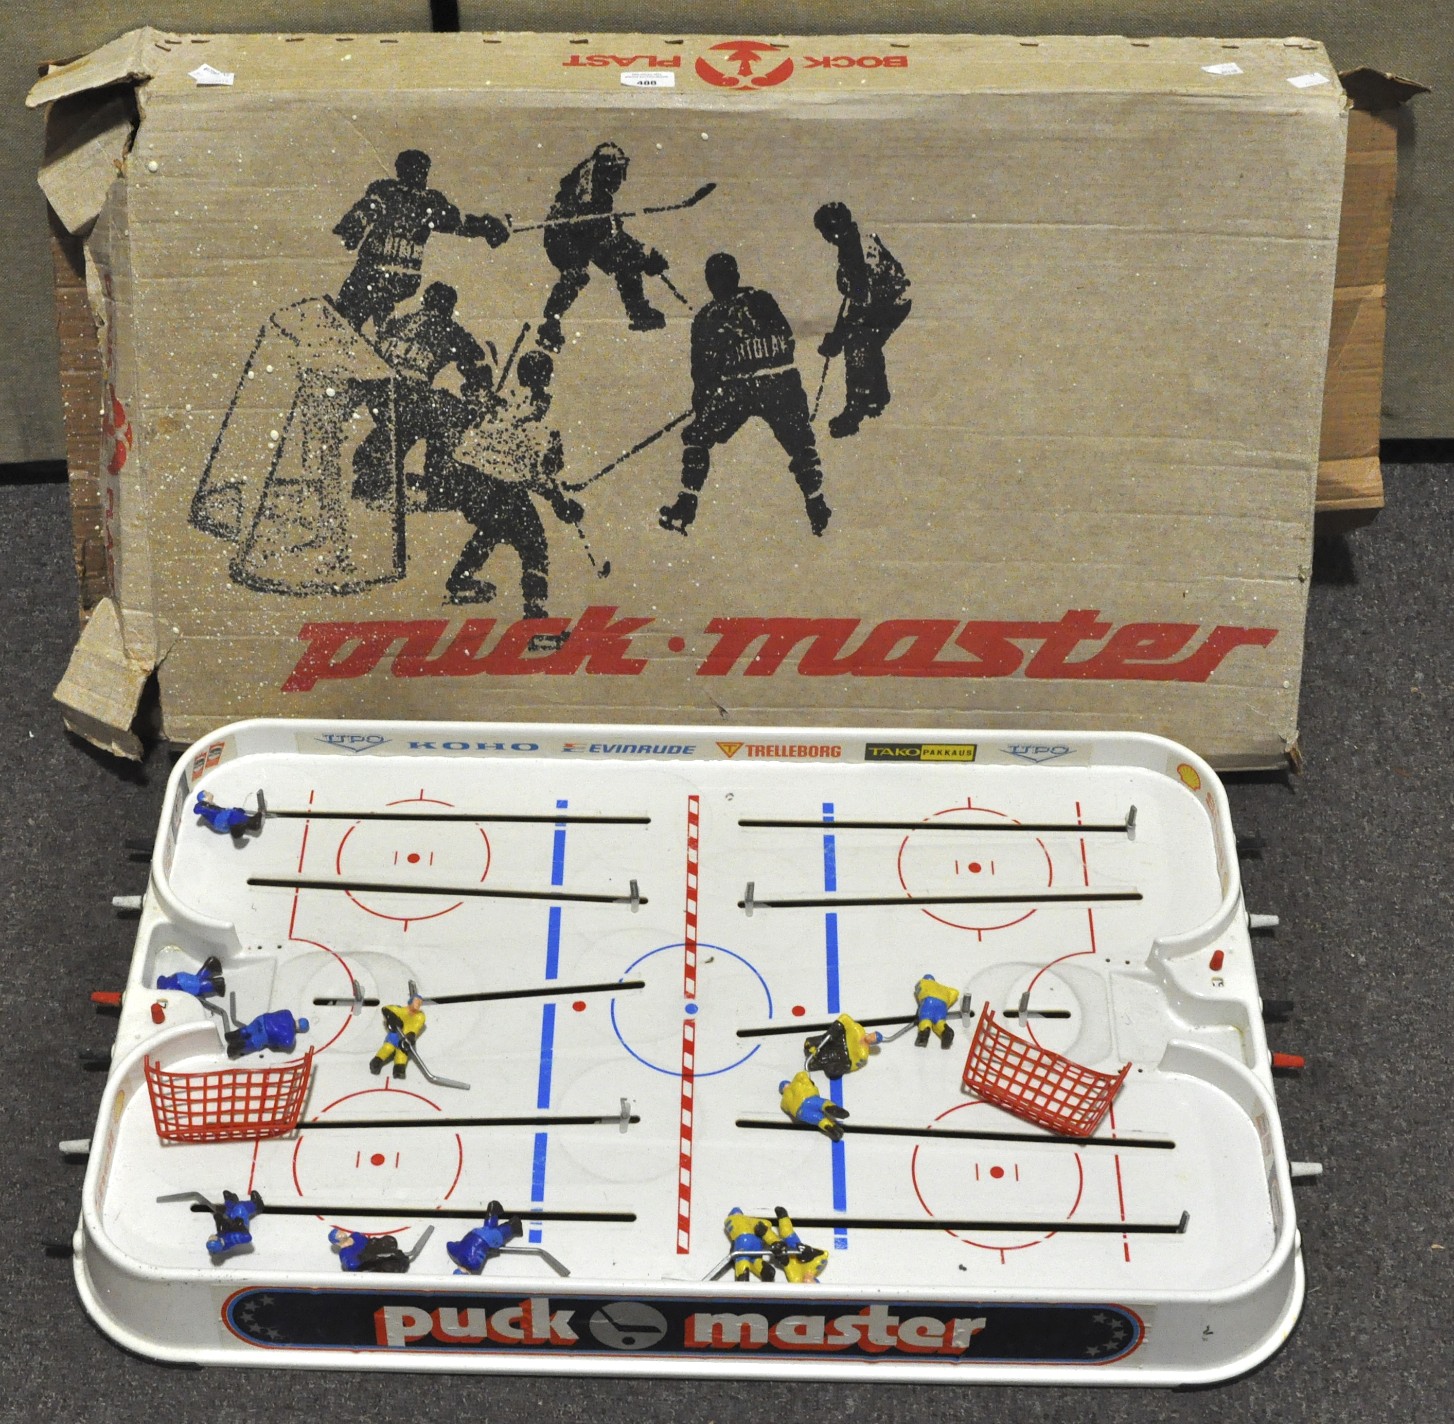 A 'Puck Master' ice hockey tabletop game,